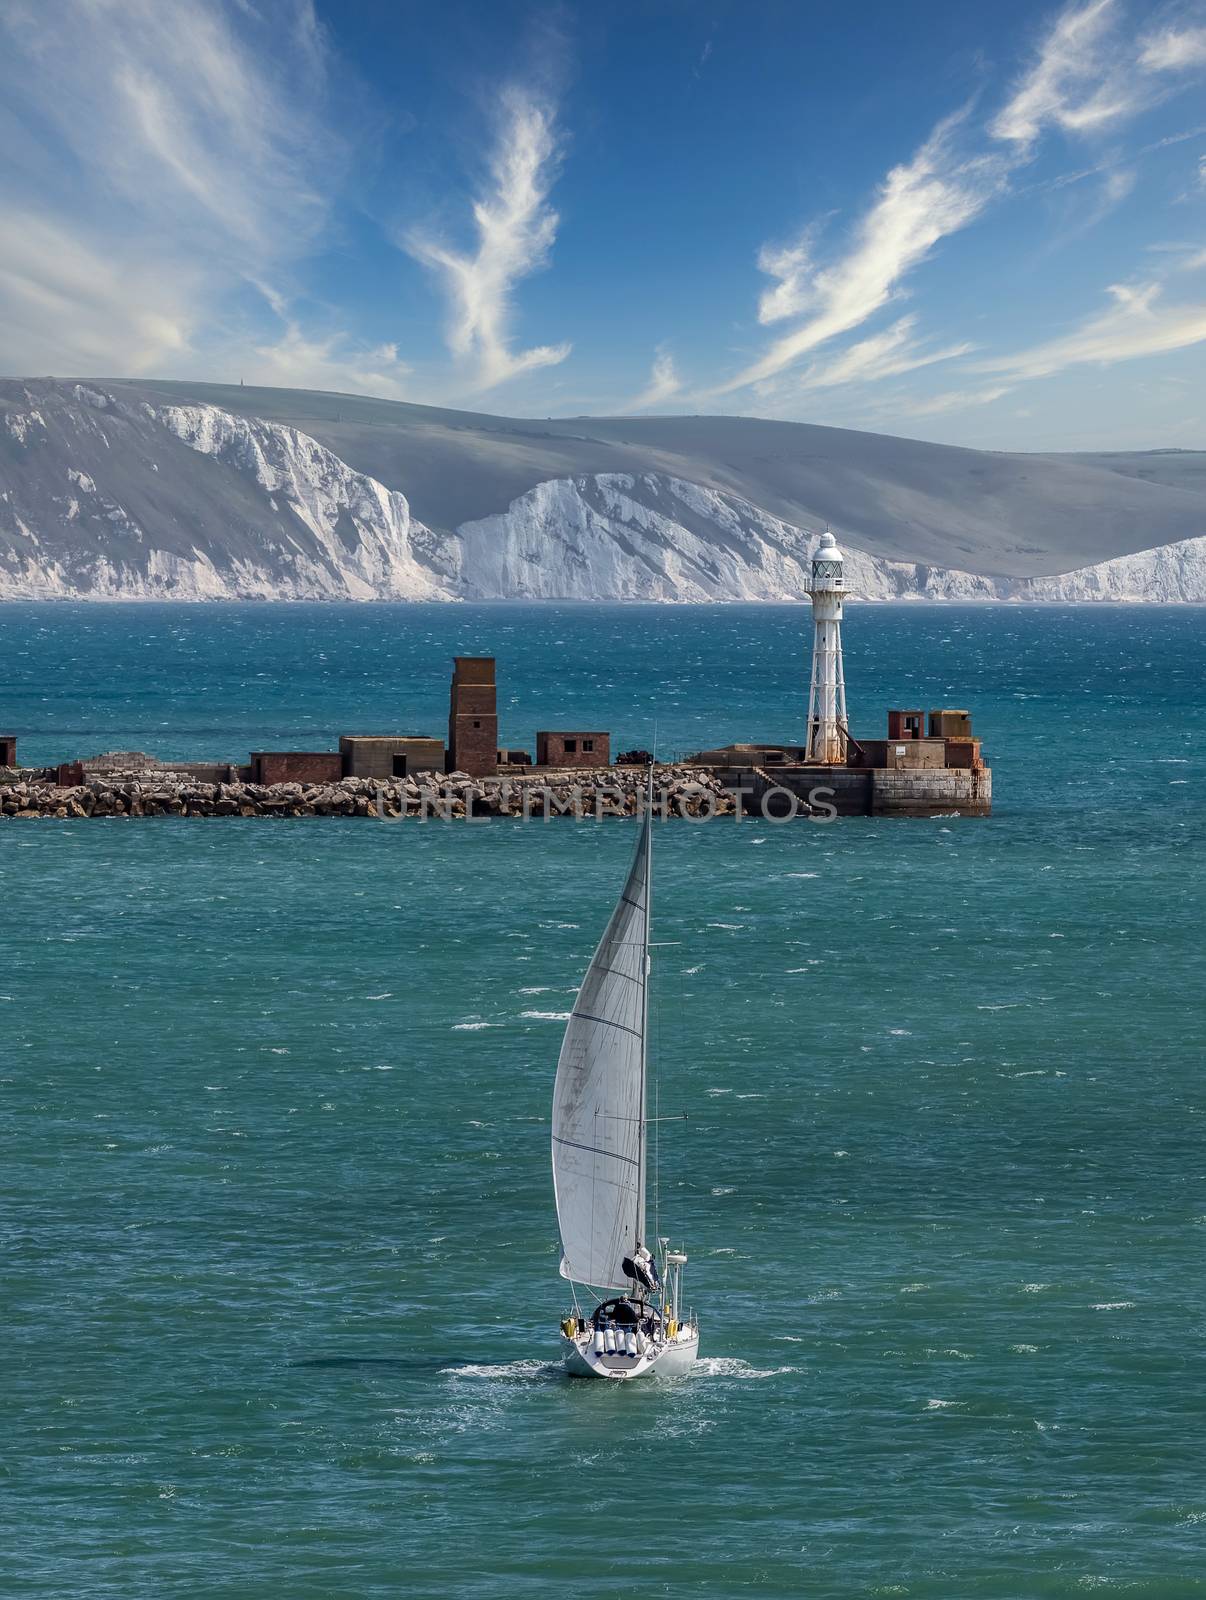 High angle shot of a white sailboat sailing in Weymouth Bay, UK. Coast line with white cliffs and gorgeous cloudy blue sky in the background. Lighthouse at the harbour entrance. Sport and recreation concept. Vertical, portrai format.